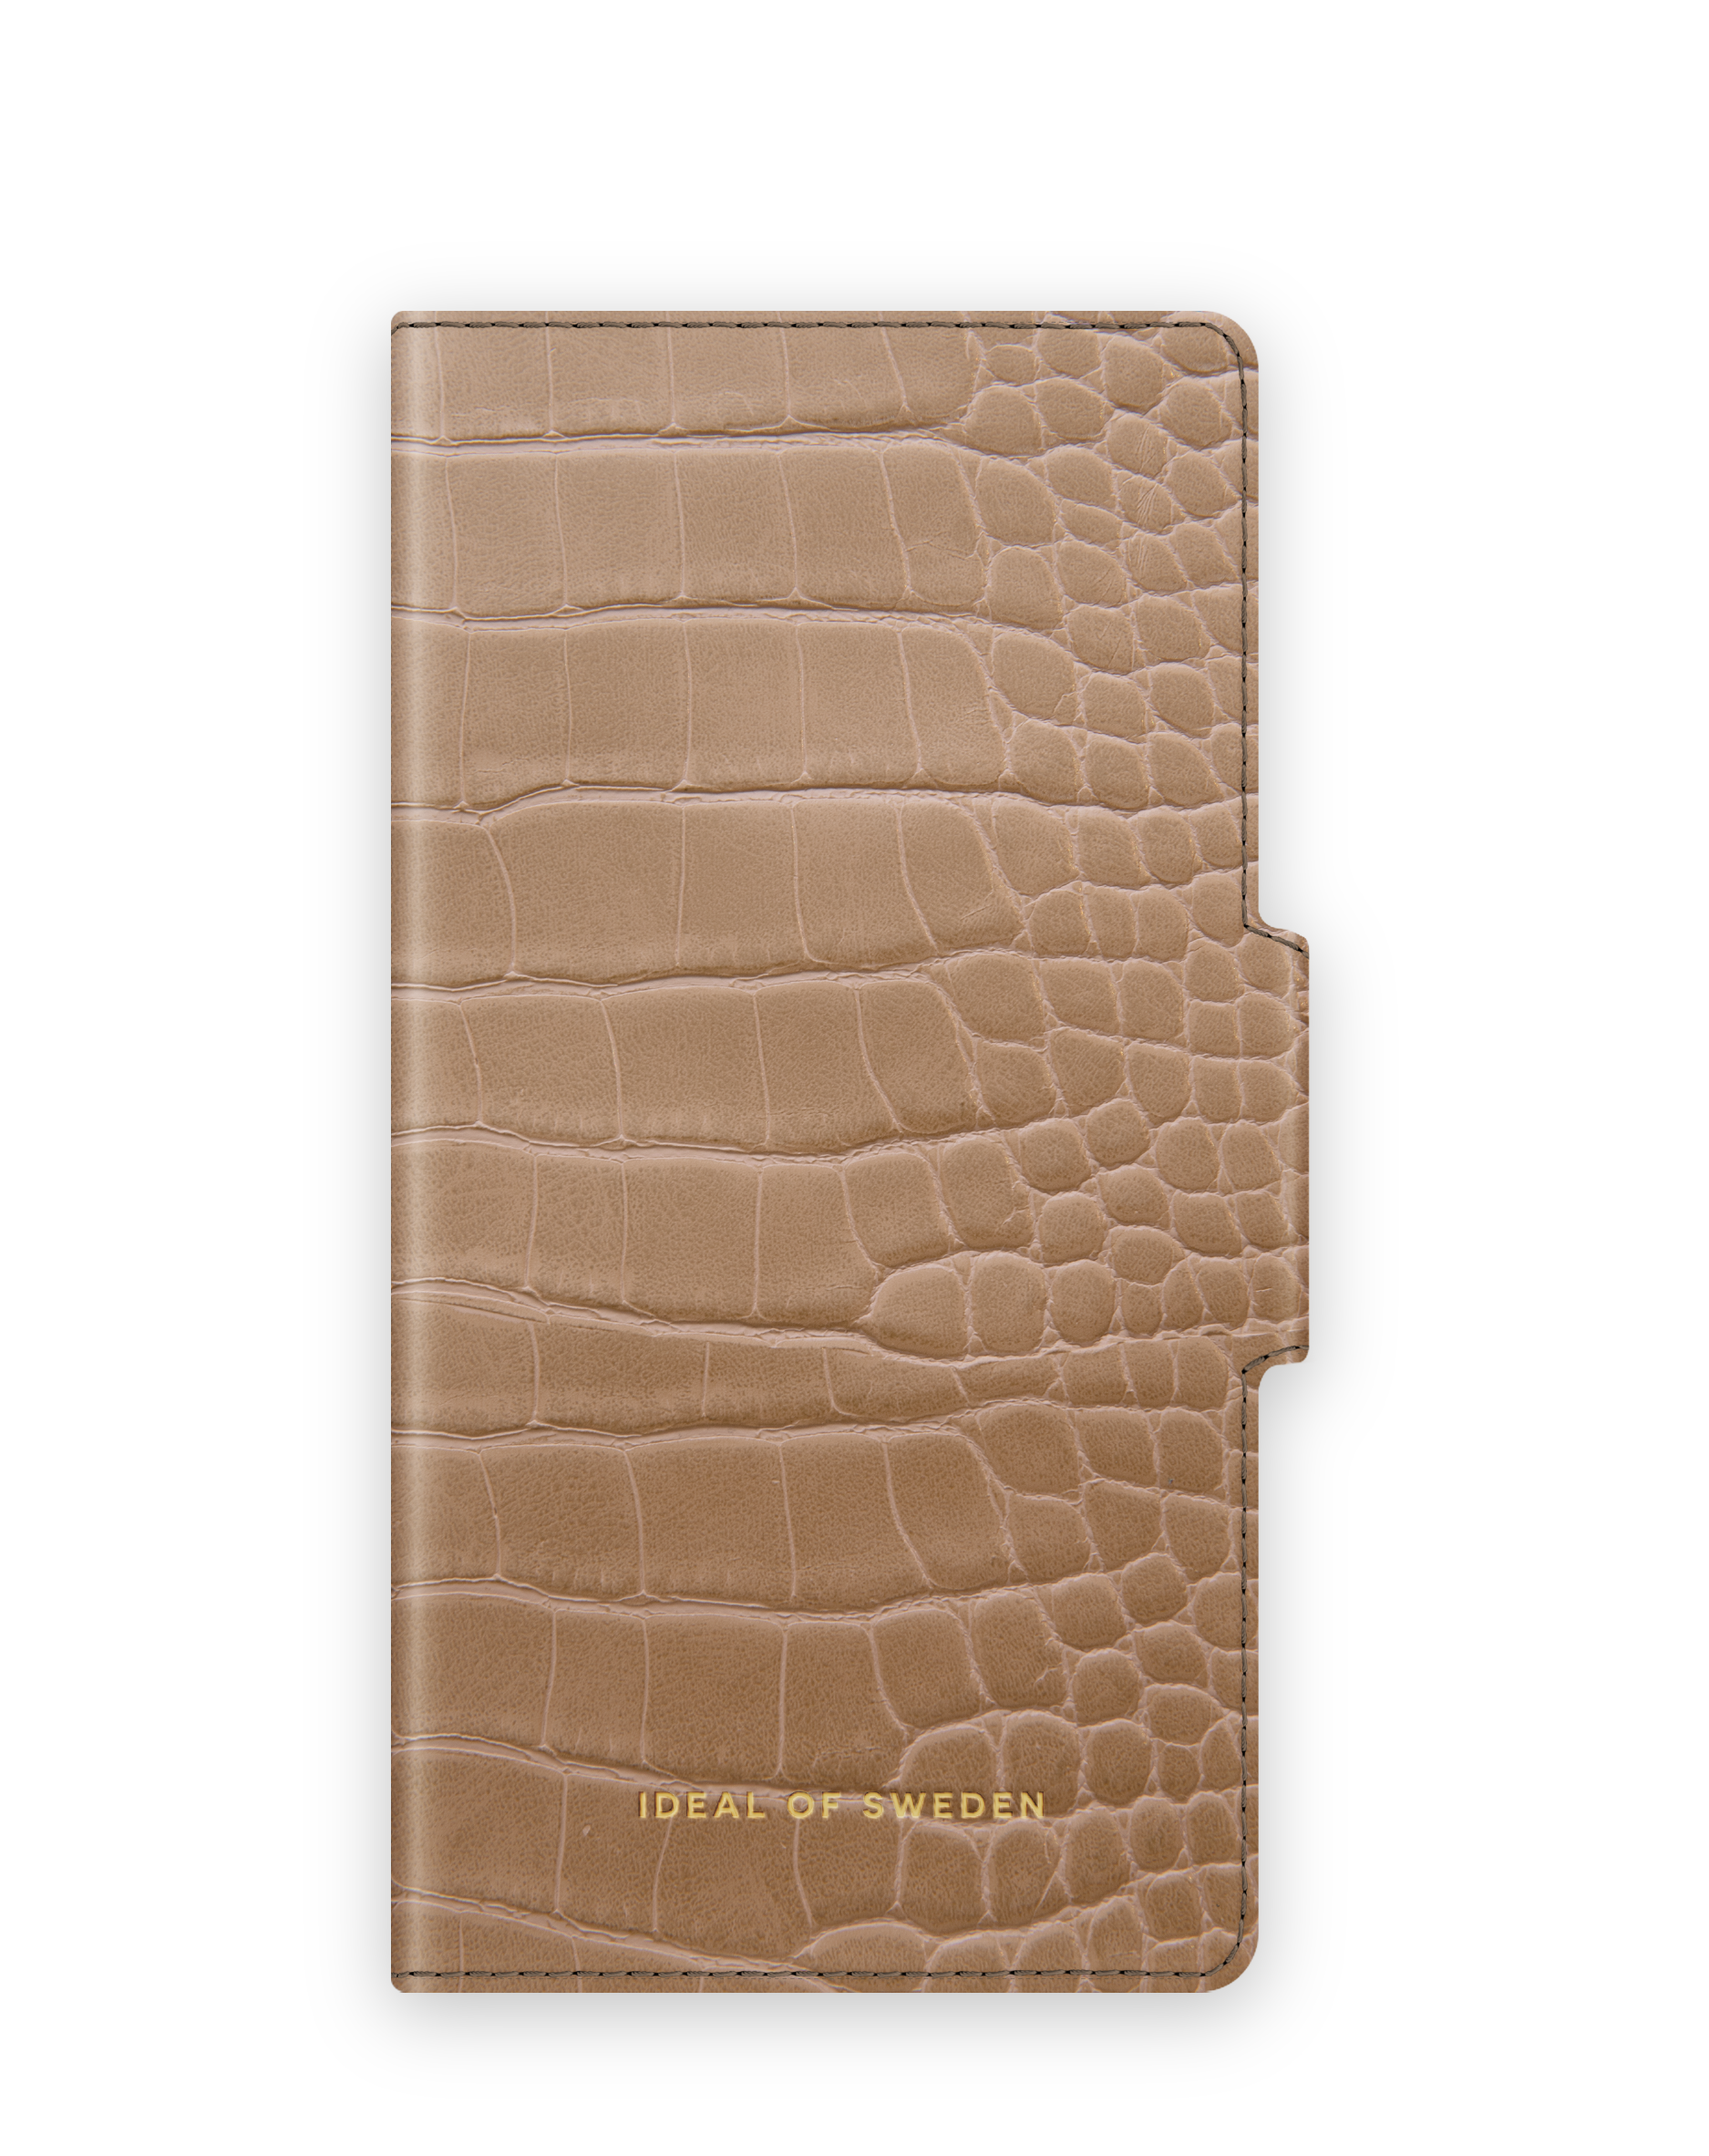 Croco Apple, SWEDEN iPhone Camel IDEAL Pro, OF 12/12 IDAWAW21-I2061-325, Bookcover,